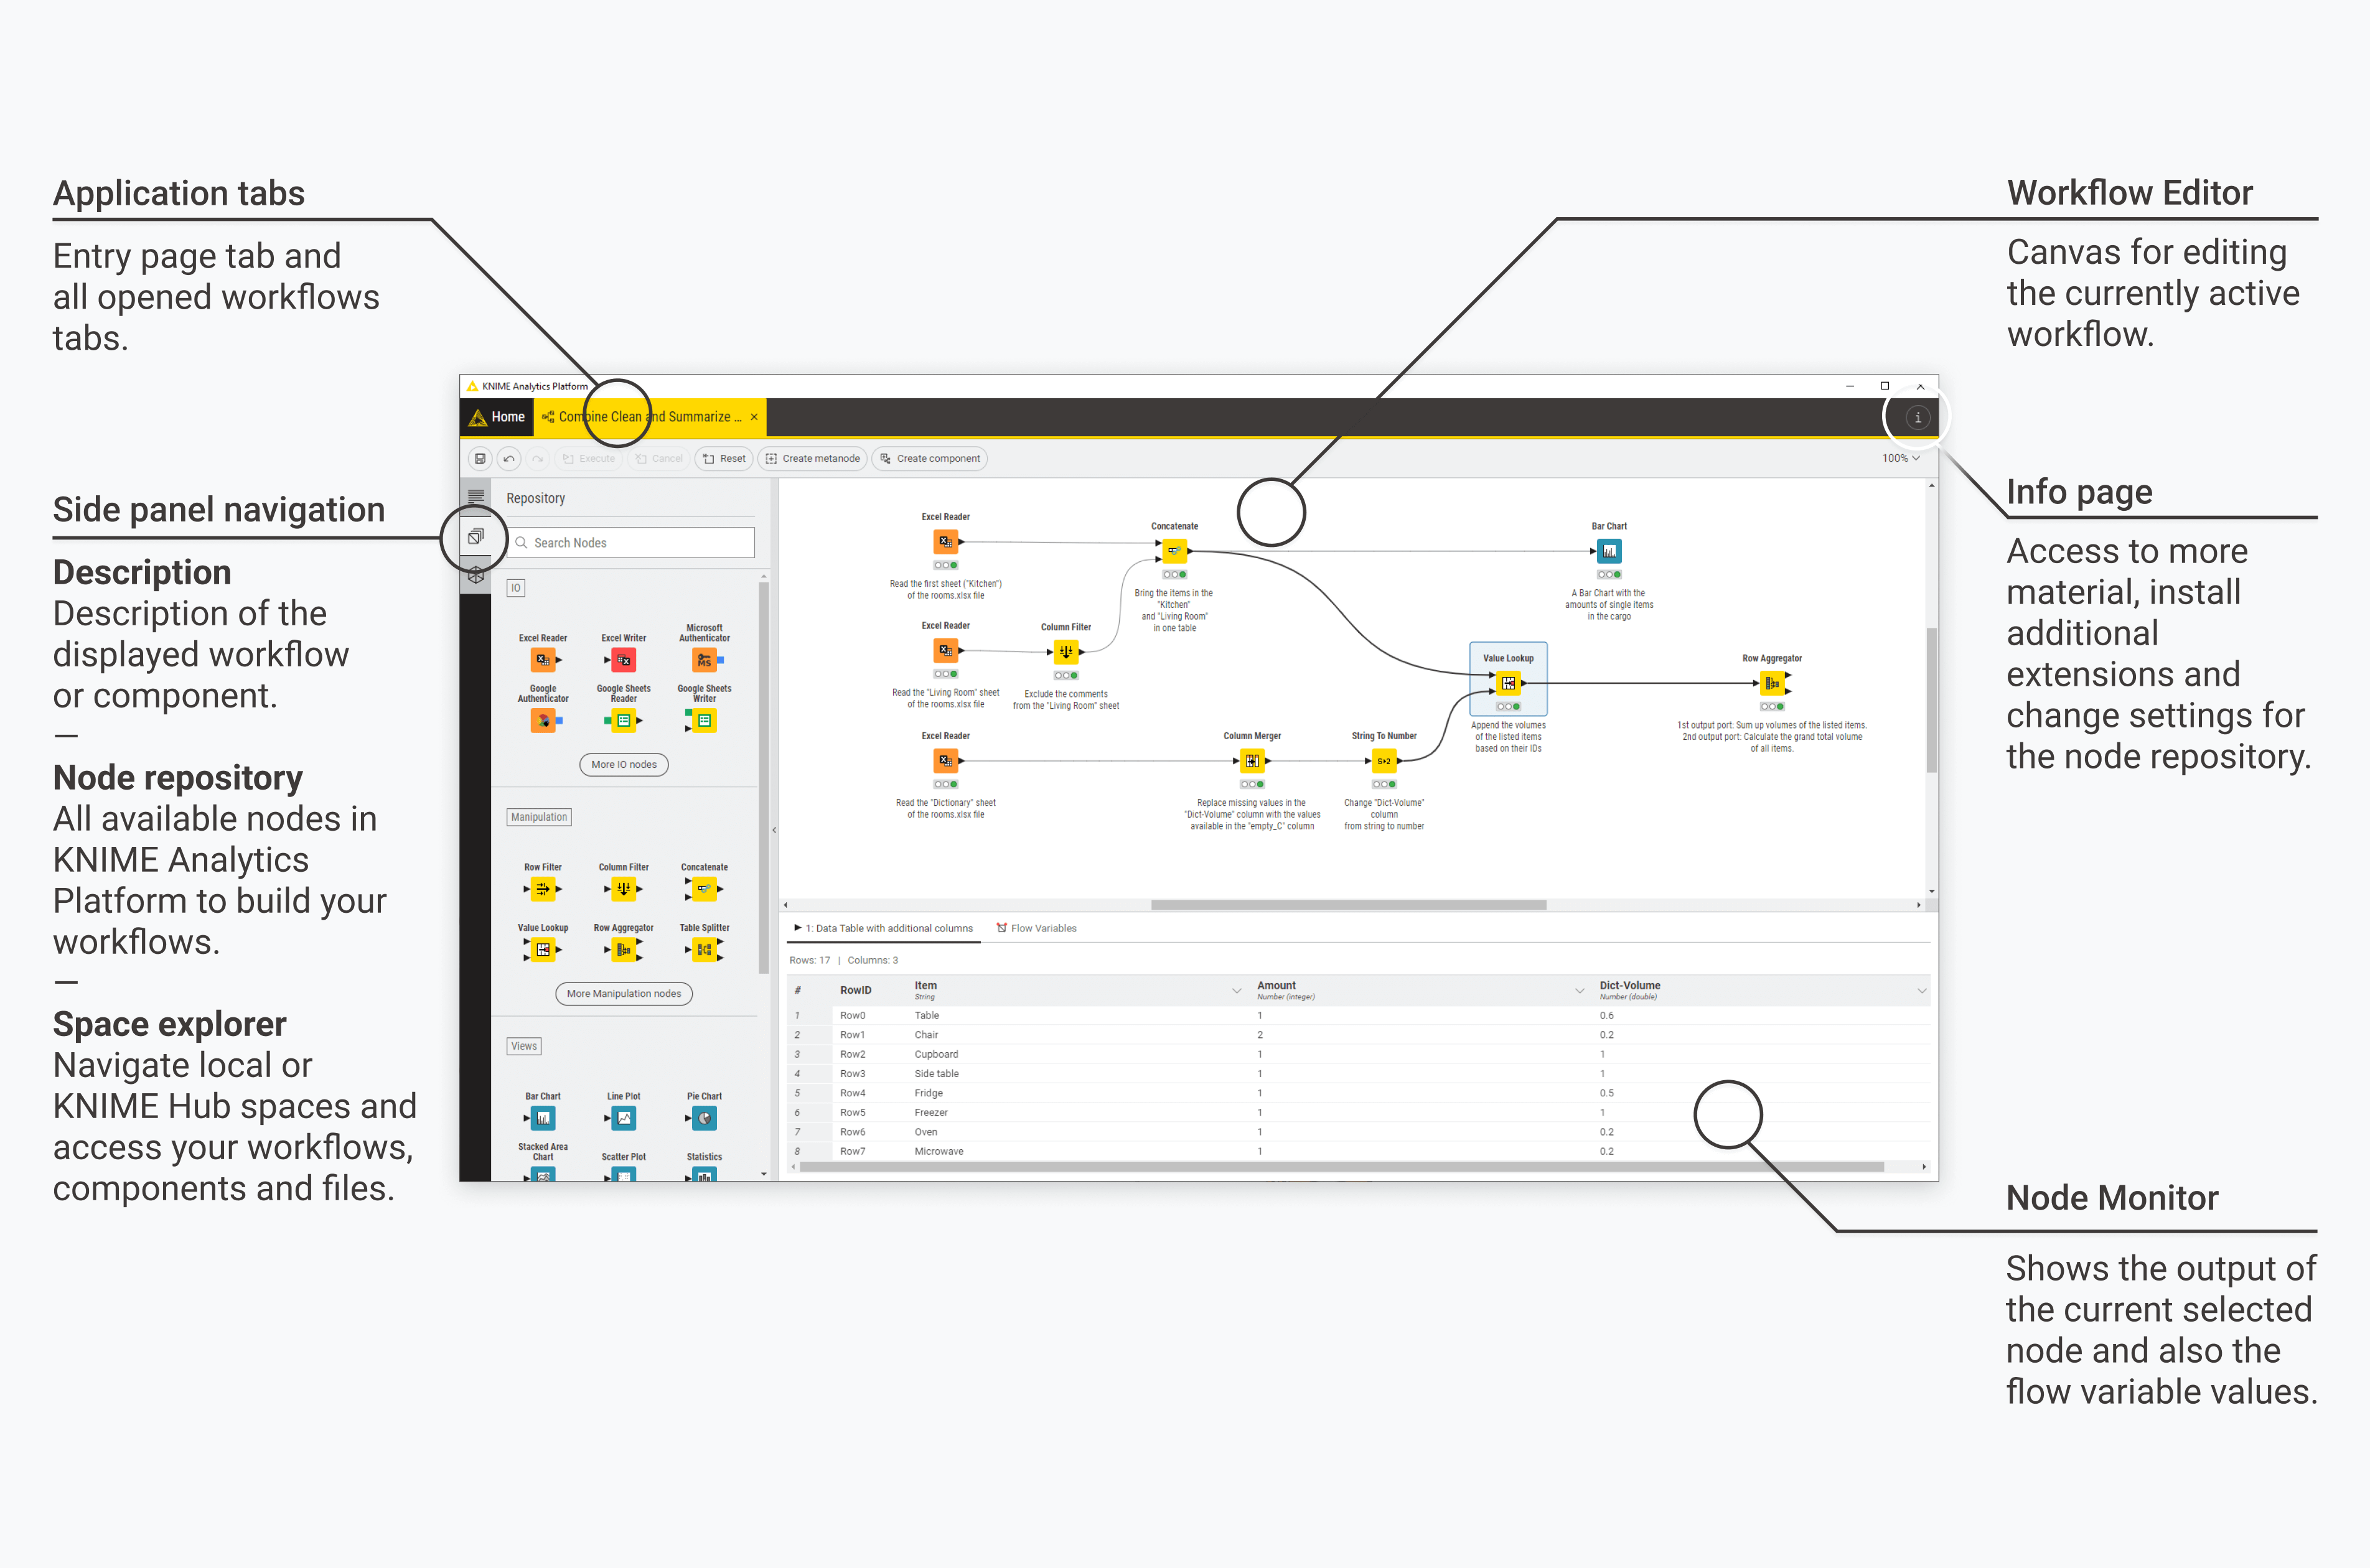 The KNIME Analytics Platform user interface - the KNIME Workbench - displays the current, open workflow(s). Here is the general user interface layout — application tabs, side panel, workflow editor and node monitor.